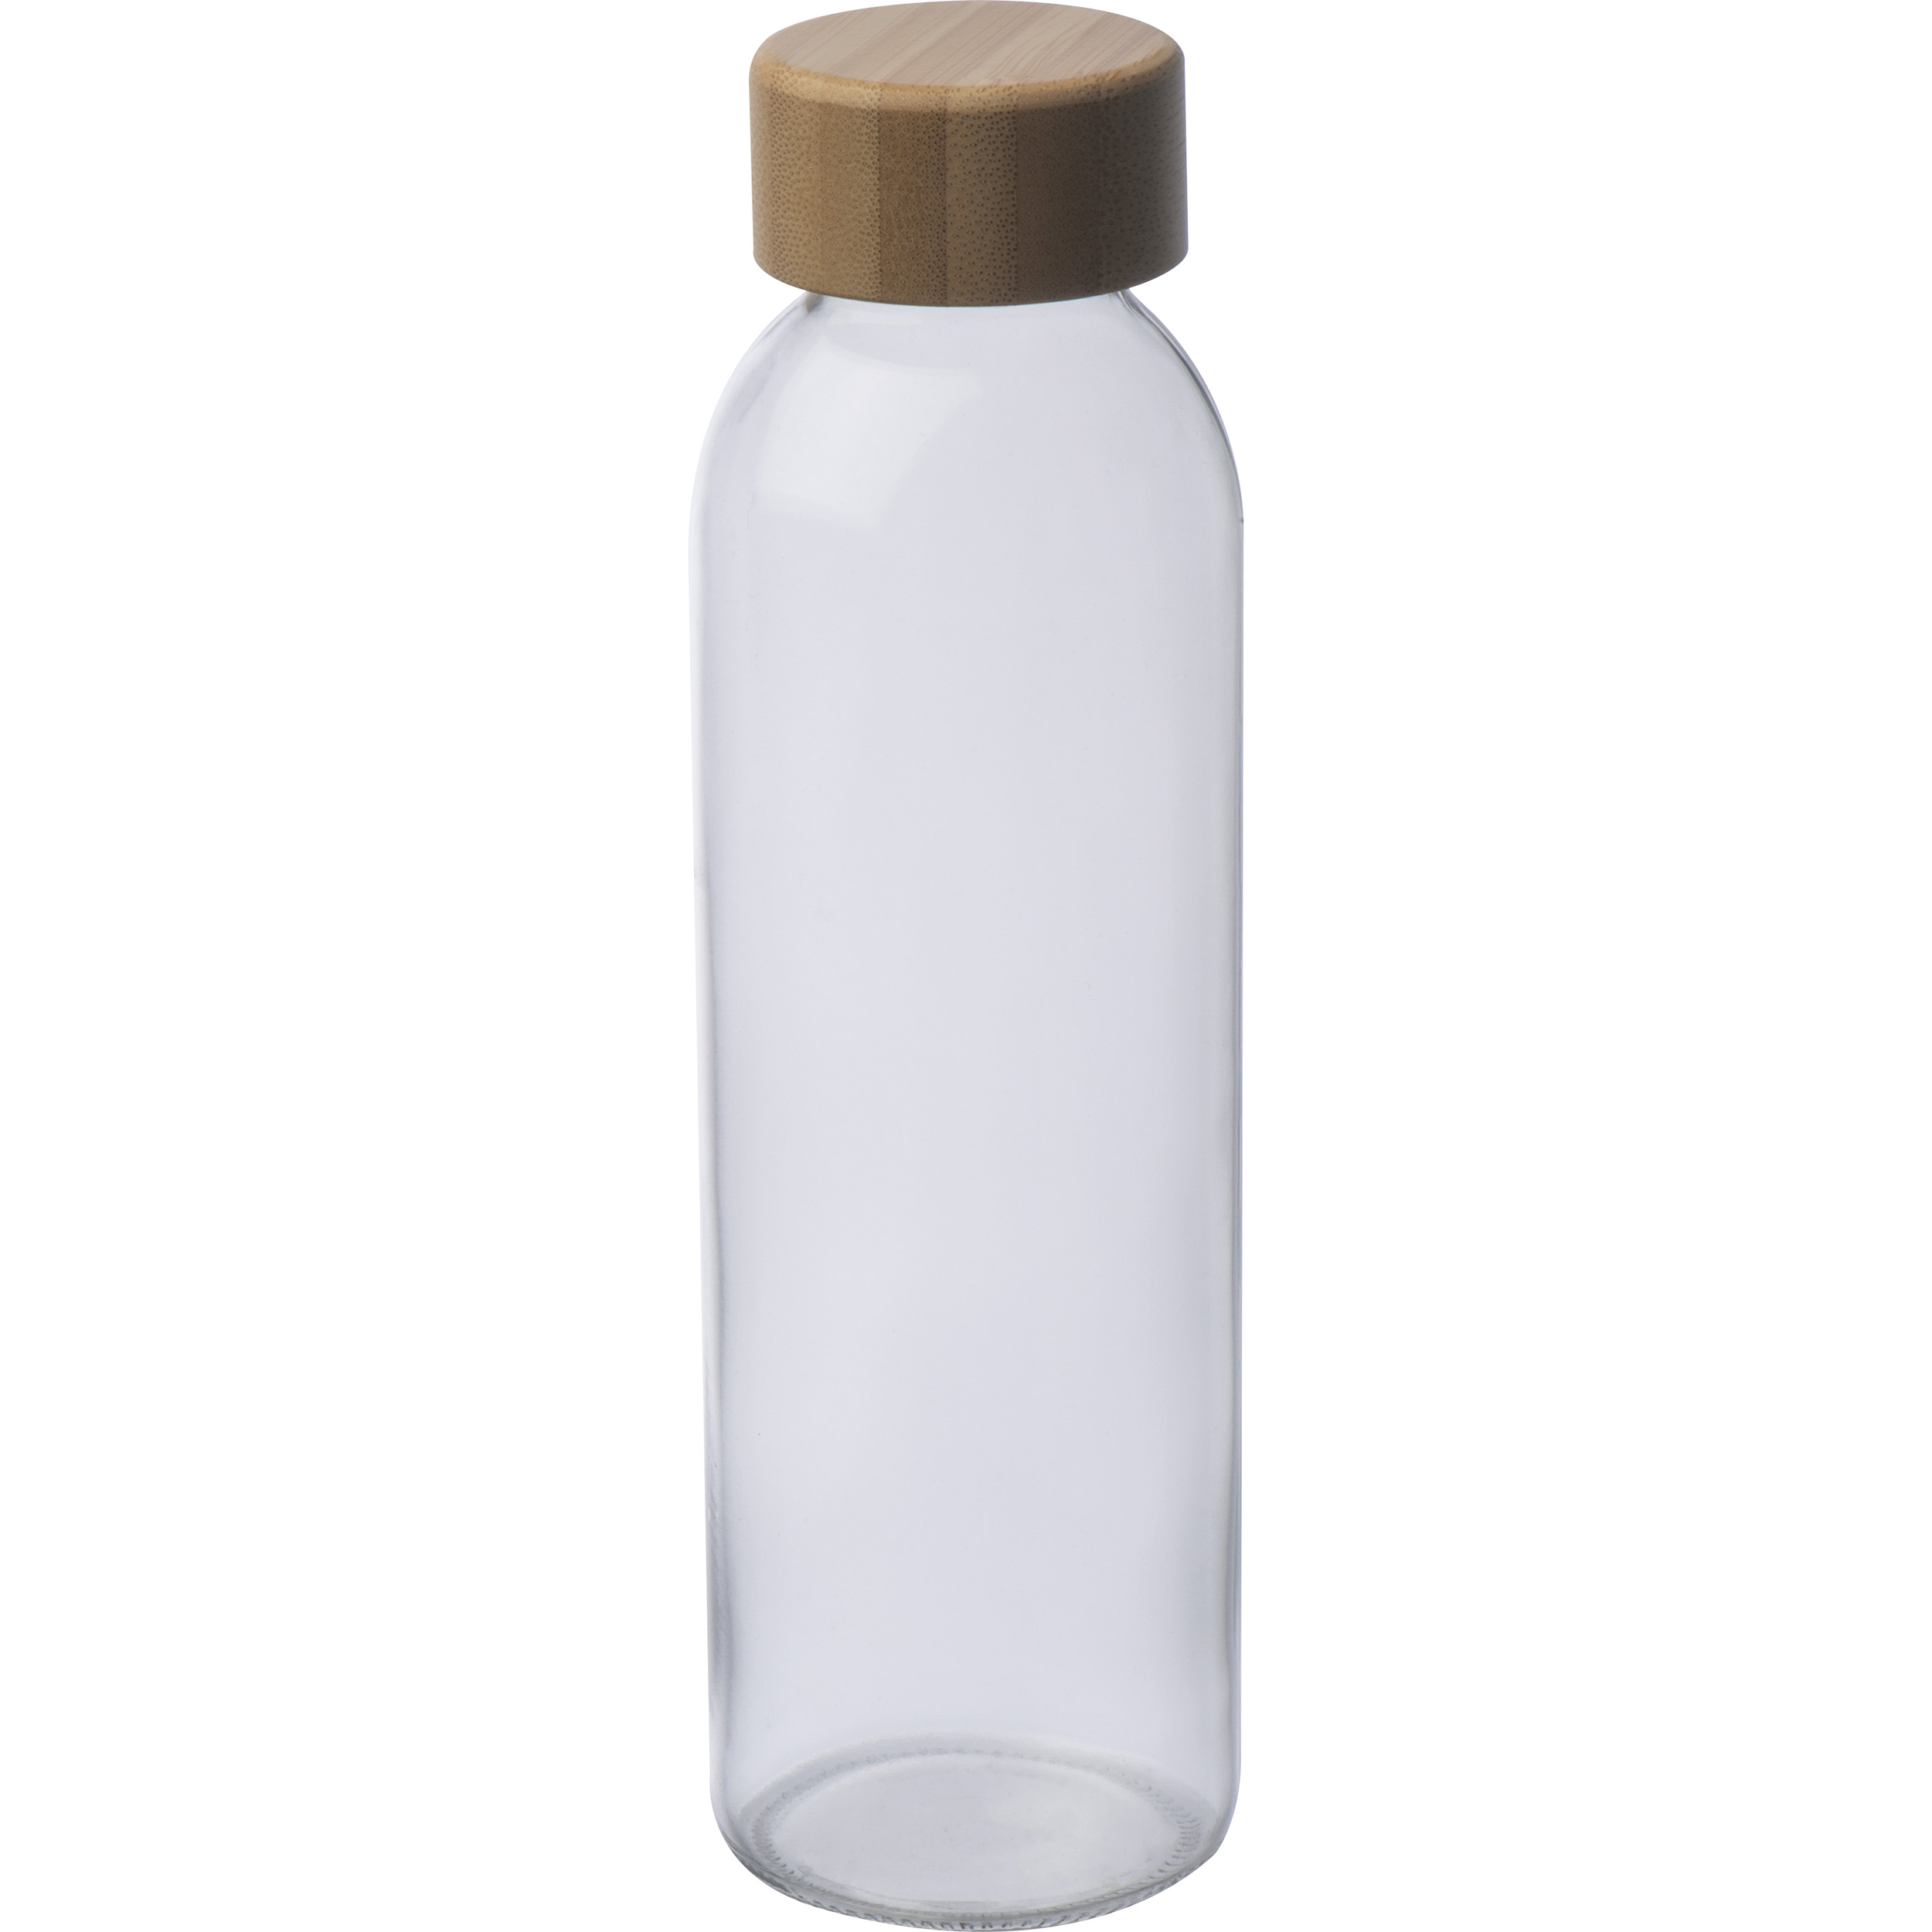 Glass bottle with bamboo lid and Jute cover